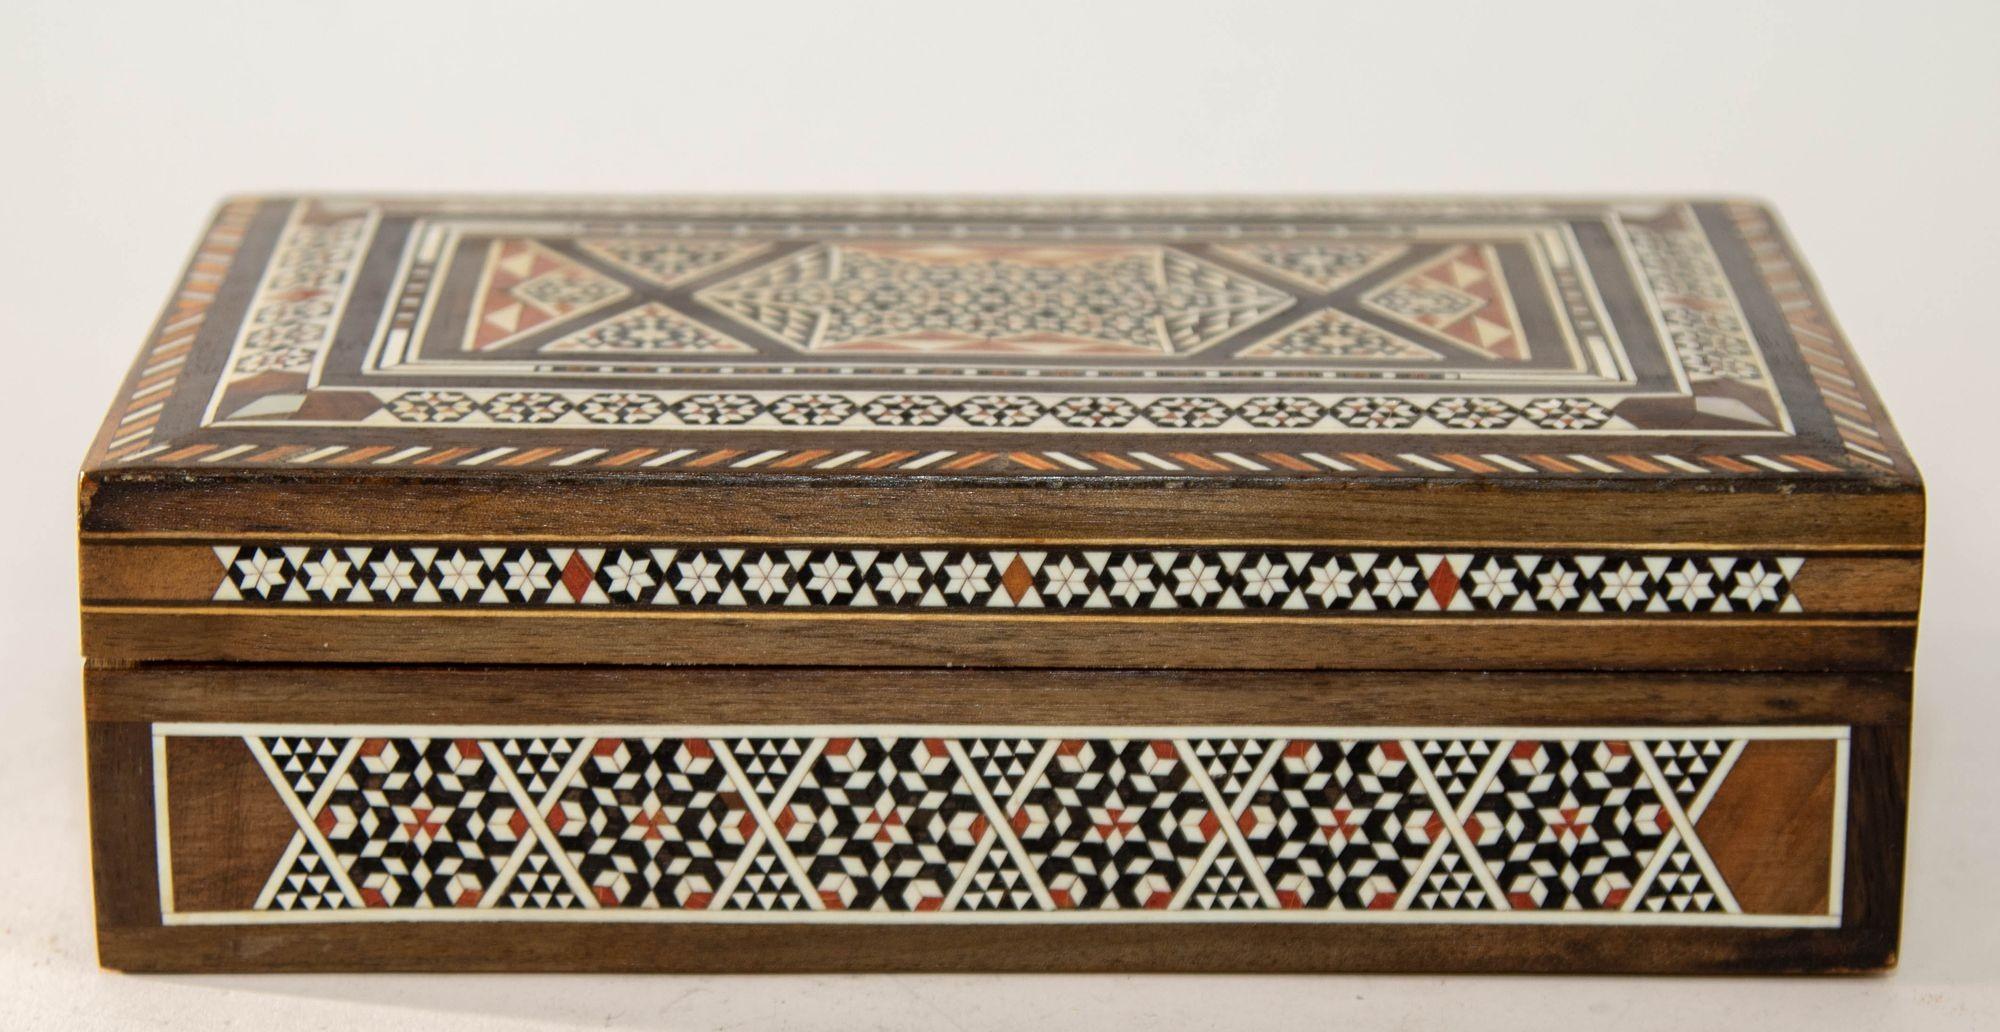 1950s Large Decorative Middle Eastern Islamic Moorish Box In Good Condition For Sale In North Hollywood, CA